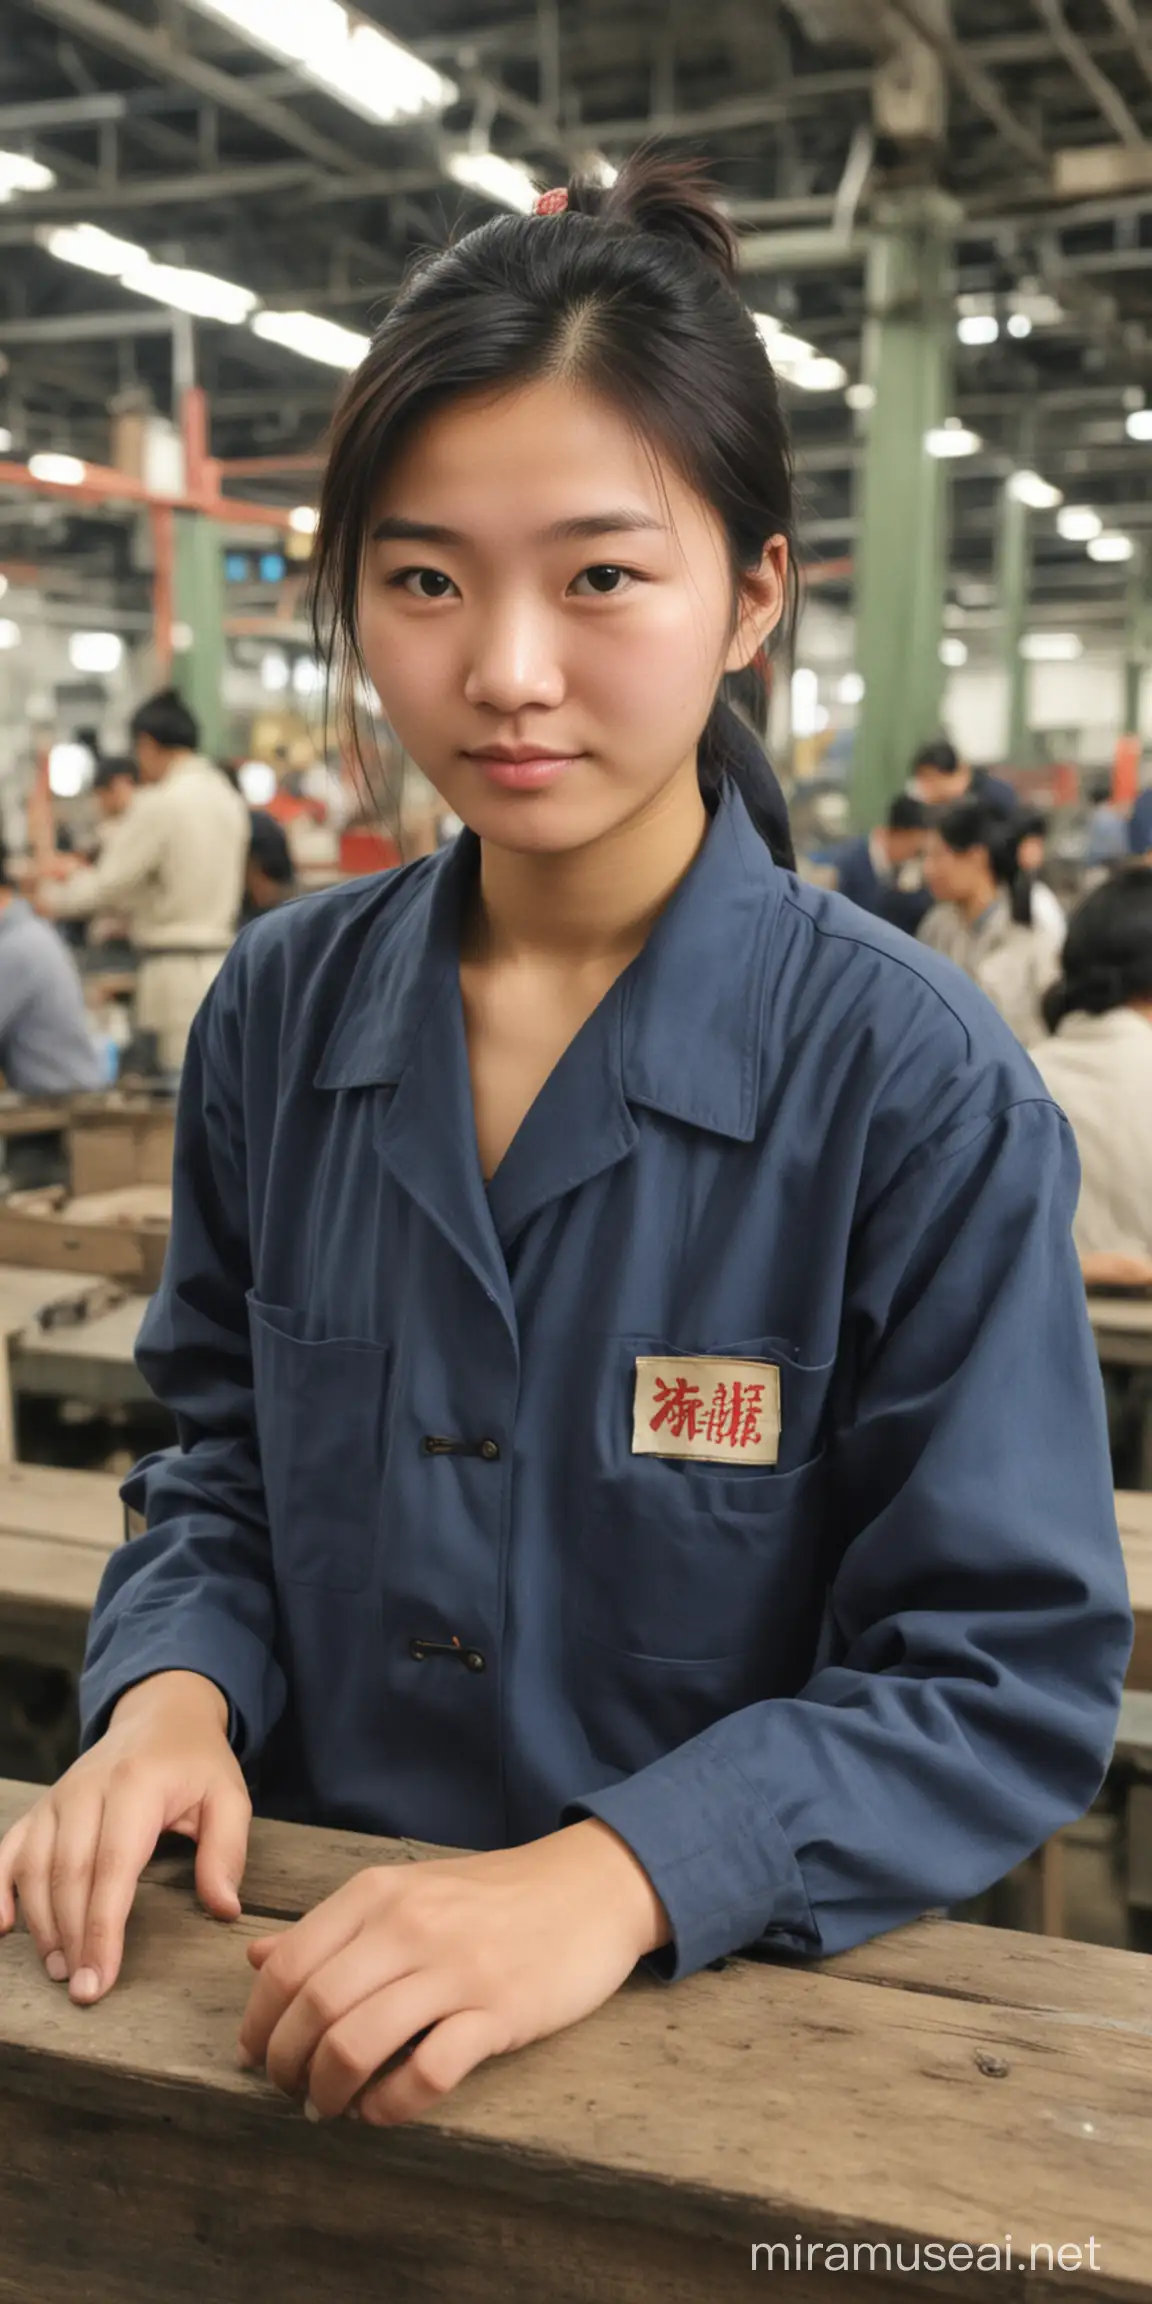 Youthful Chinese Factory Worker in Vintage Blur